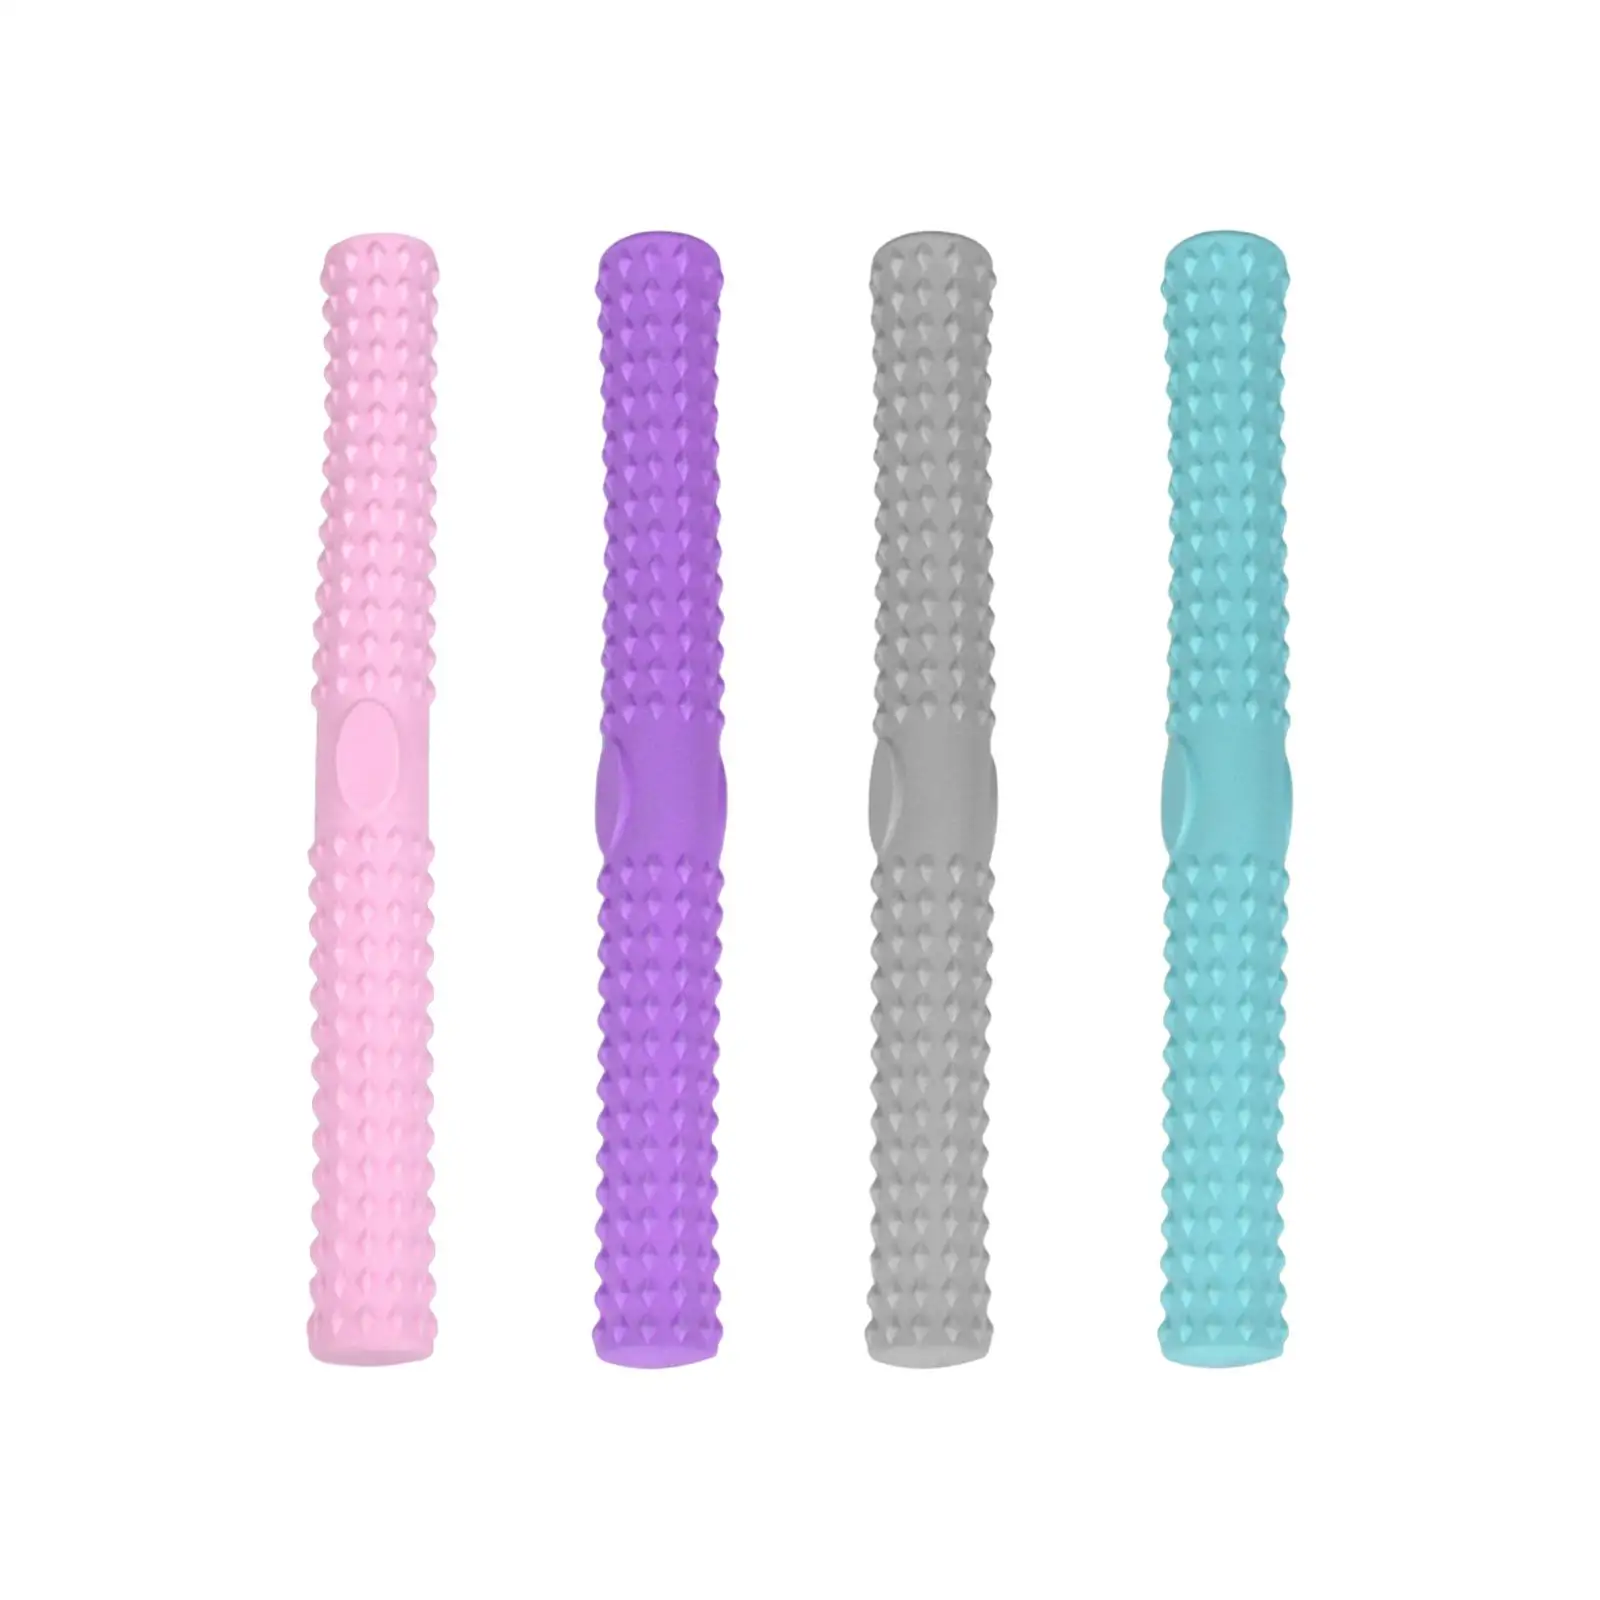 Twist Exerciser Bars Home Hand Forearm Strengthener Body Massage Stick for Legs Muscle Training Neck Meridian Clap Relaxing